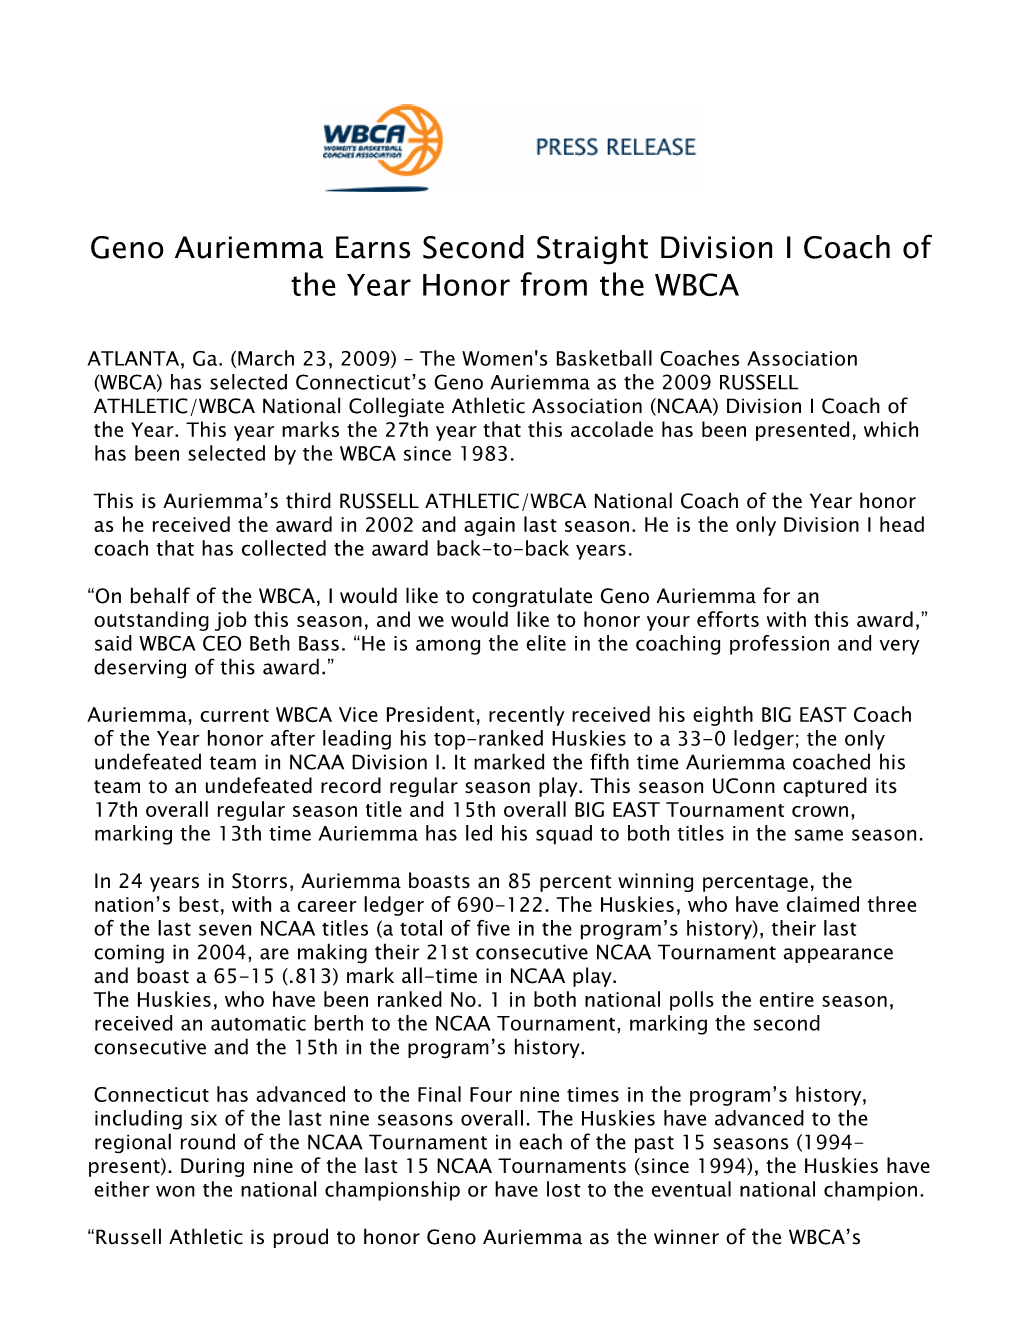 Geno Auriemma Earns Second Straight Division I Coach of the Year Honor from the WBCA